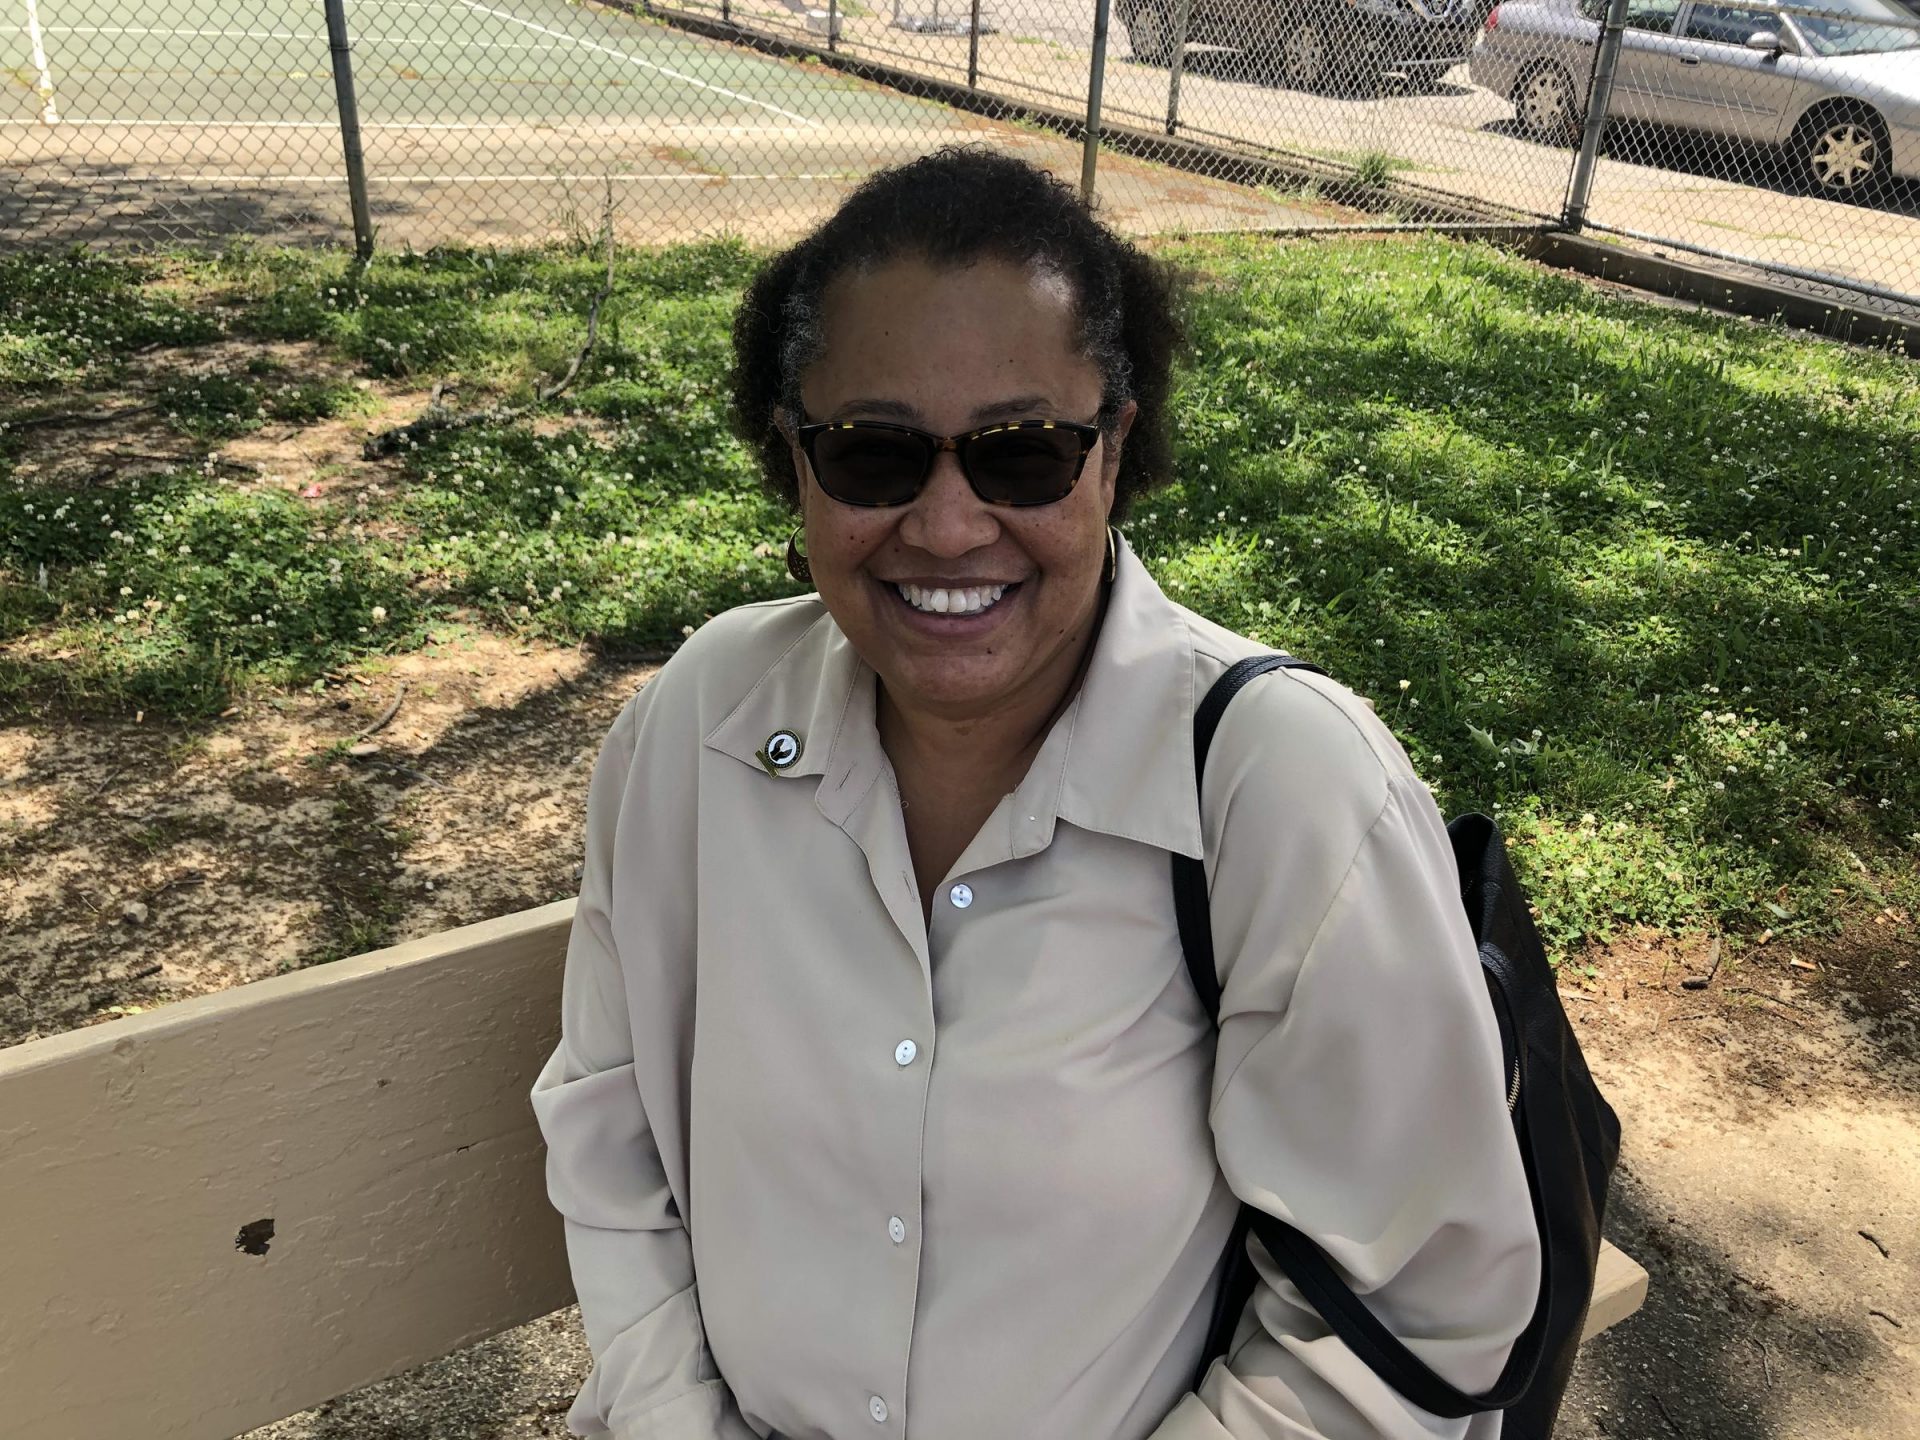 Lenore Williams, 63, grew up in Homewood. She remembers visiting the Hill District to check in on family and seeing the National Guard troops stationed throughout the neighborhood.